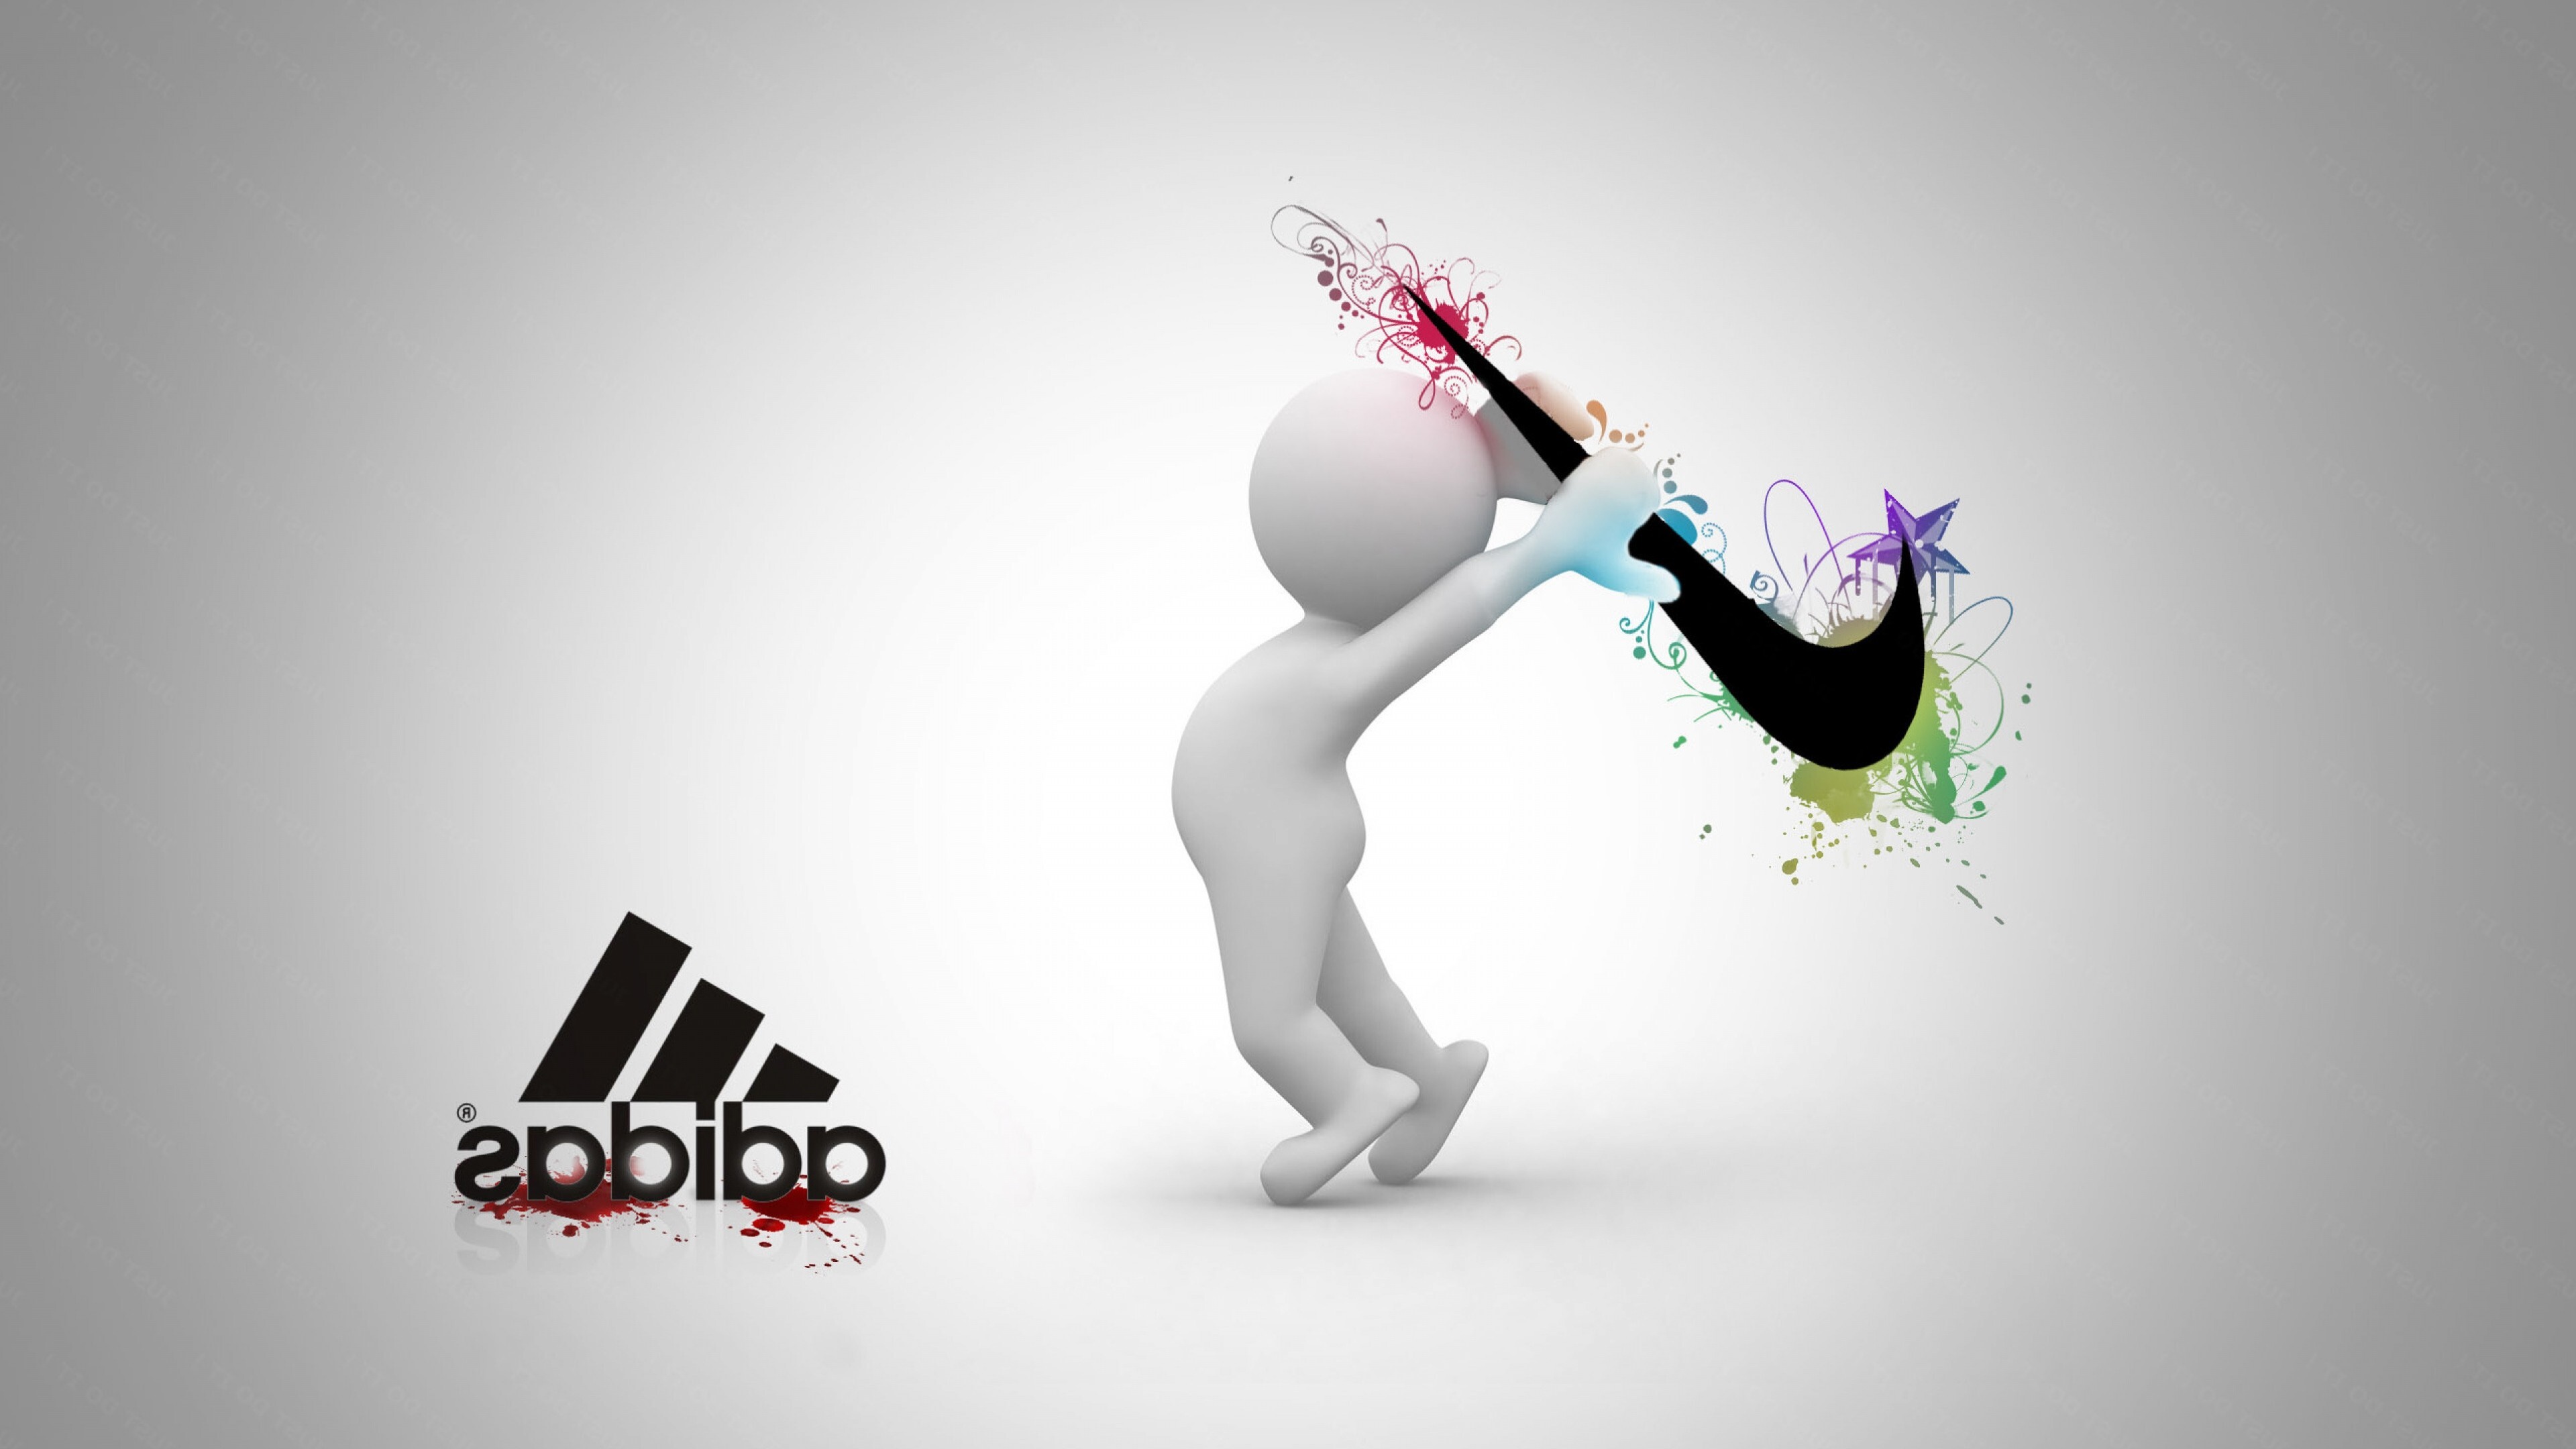 Adidas Wallpapers Top Best 65 Adidas Backgrounds Download